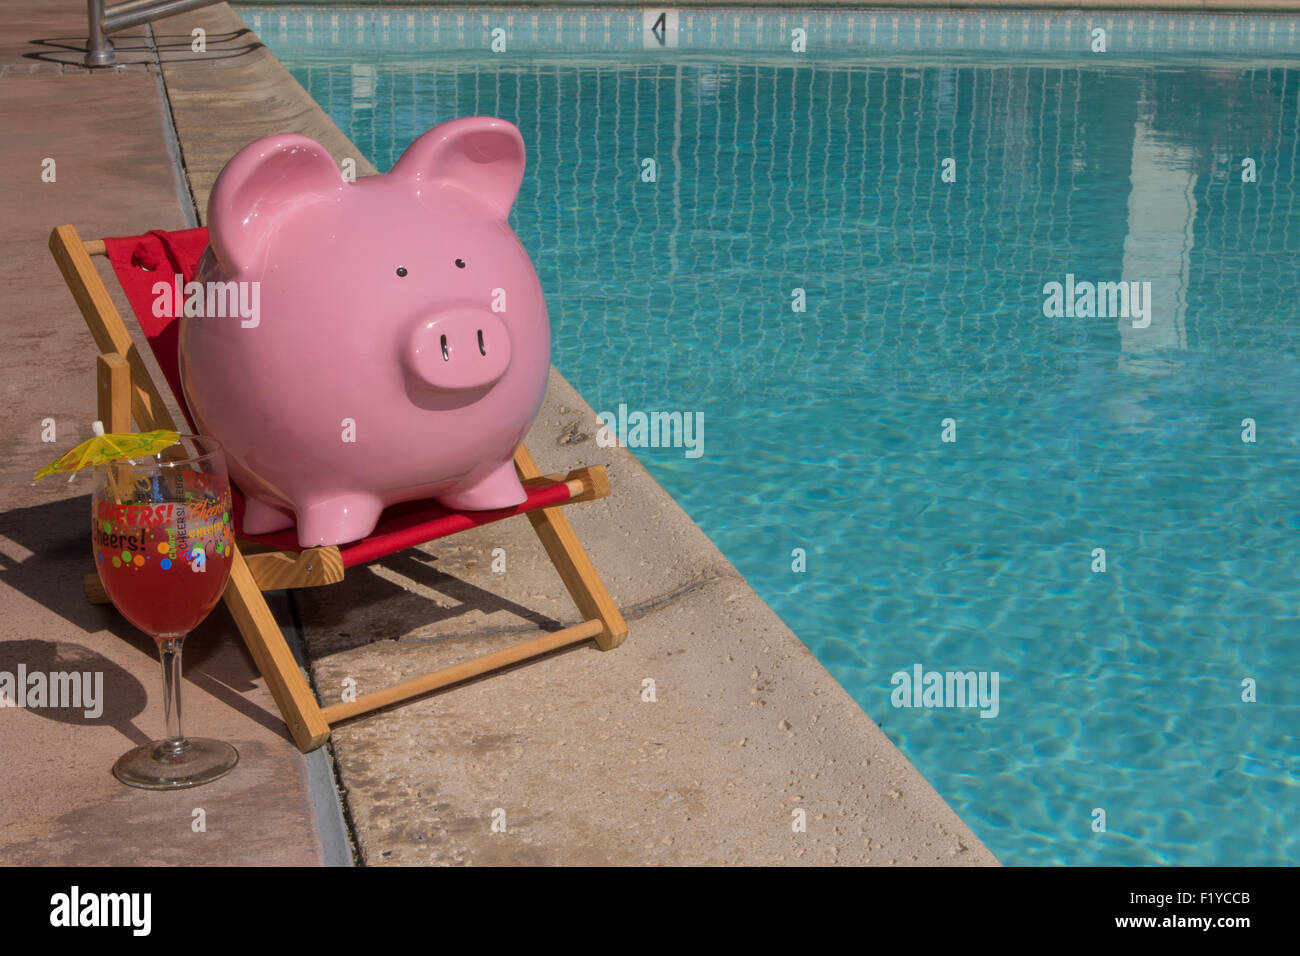 Pink piggy bank on a red deck chair relaxing by a pool on a hot summer day with a glass marked 'cheers'!  and cocktail umbrella Stock Photo